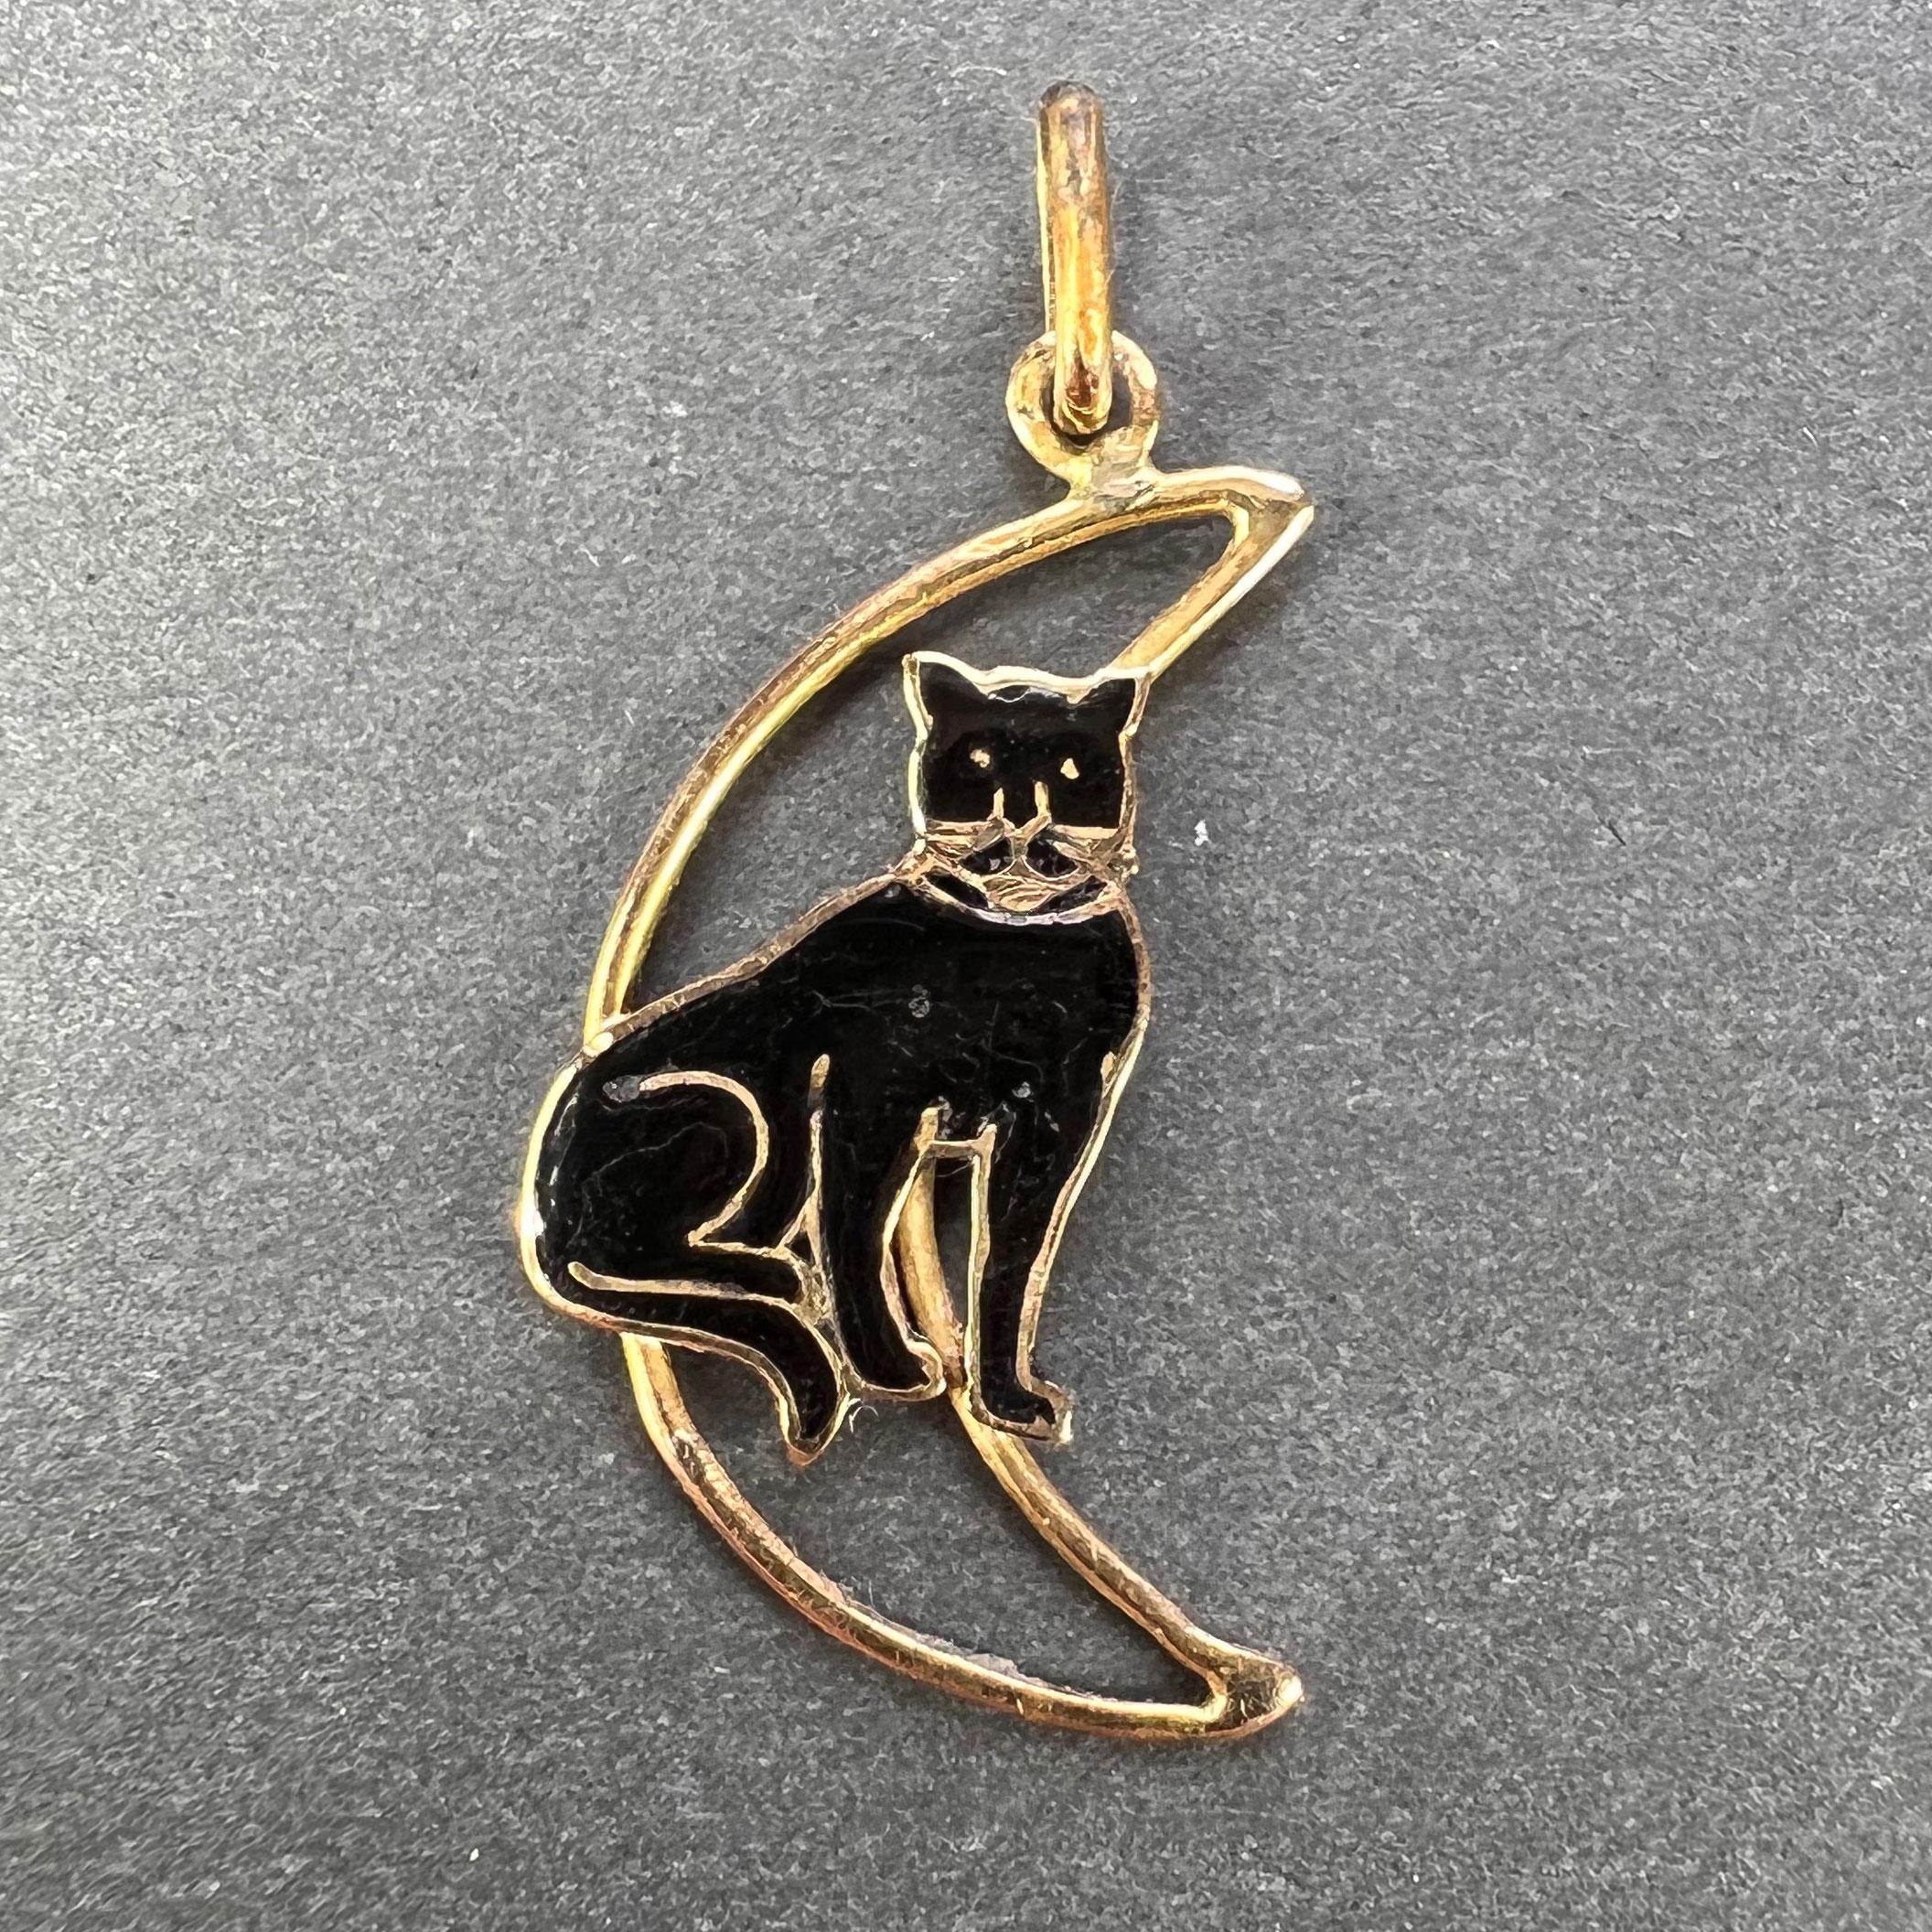 An 18 karat (18K) yellow gold charm pendant designed as a wirework crescent moon with a black enamel cat sitting in it. Stamped with the eagle’s head for 18 karat gold and French manufacture.

Dimensions: 2.4 x 1.4 x 0.15 cm (not including jump